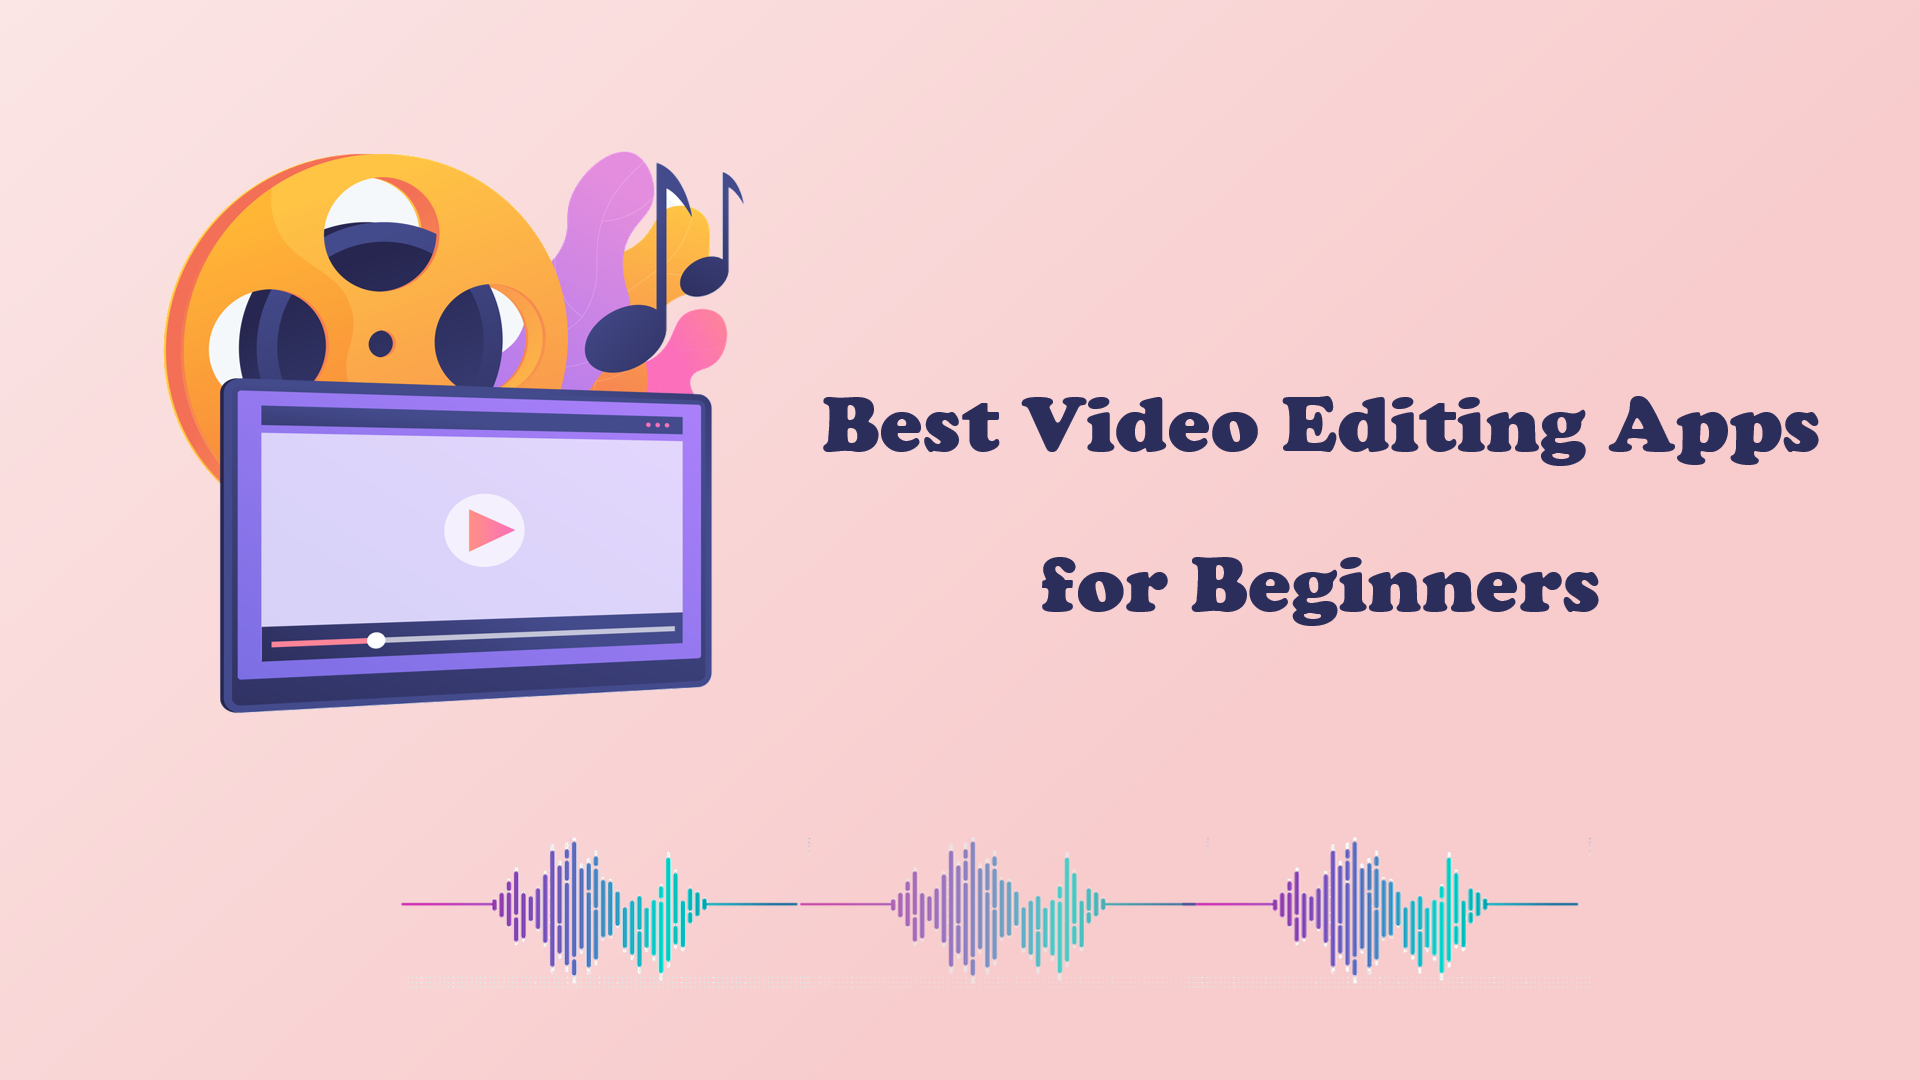 Best Video Editing Apps for Beginners